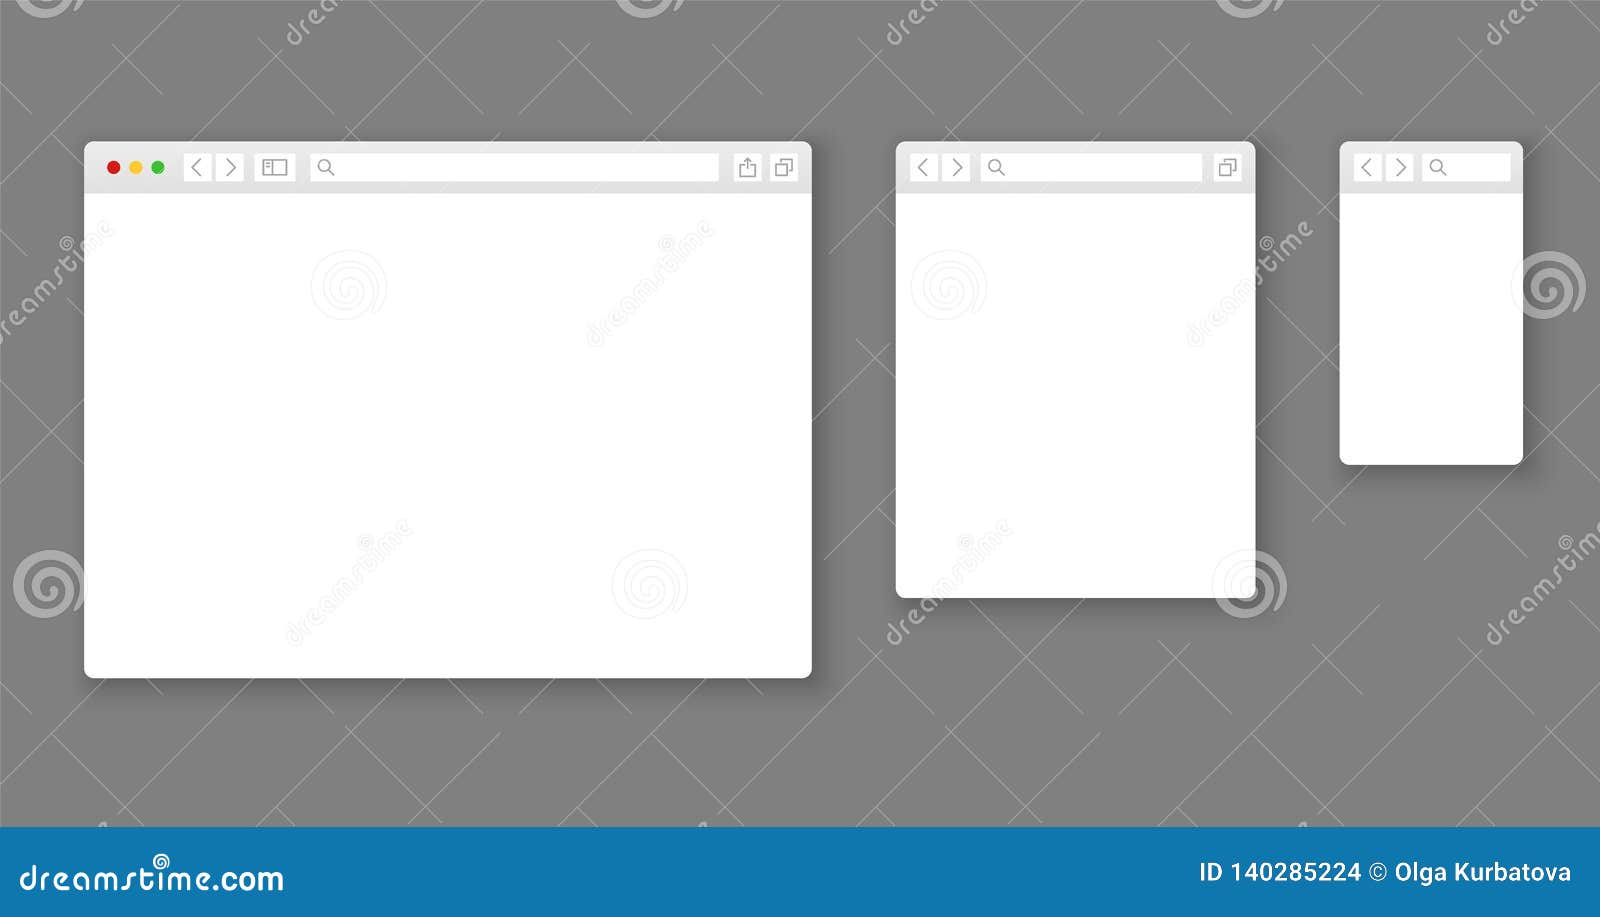 browser mockups. website different devices web window mobile screen internet flat template empty page network row set